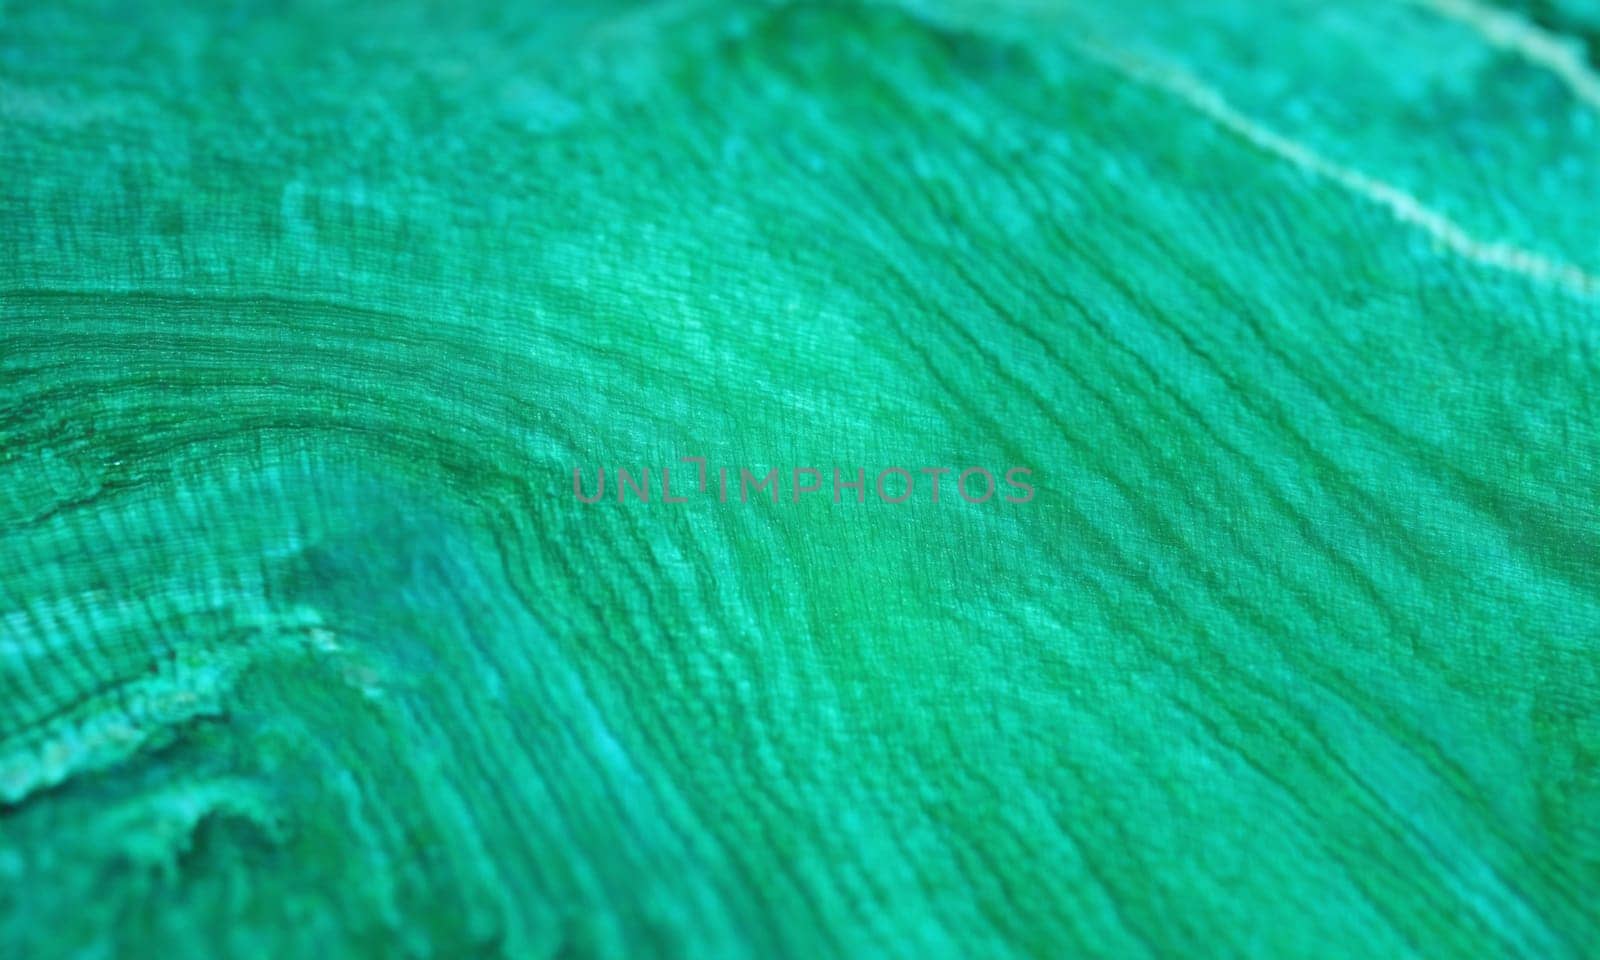 malachite. Emerald green natural stone texture background. Close up of emerald gemstone by Andre1ns